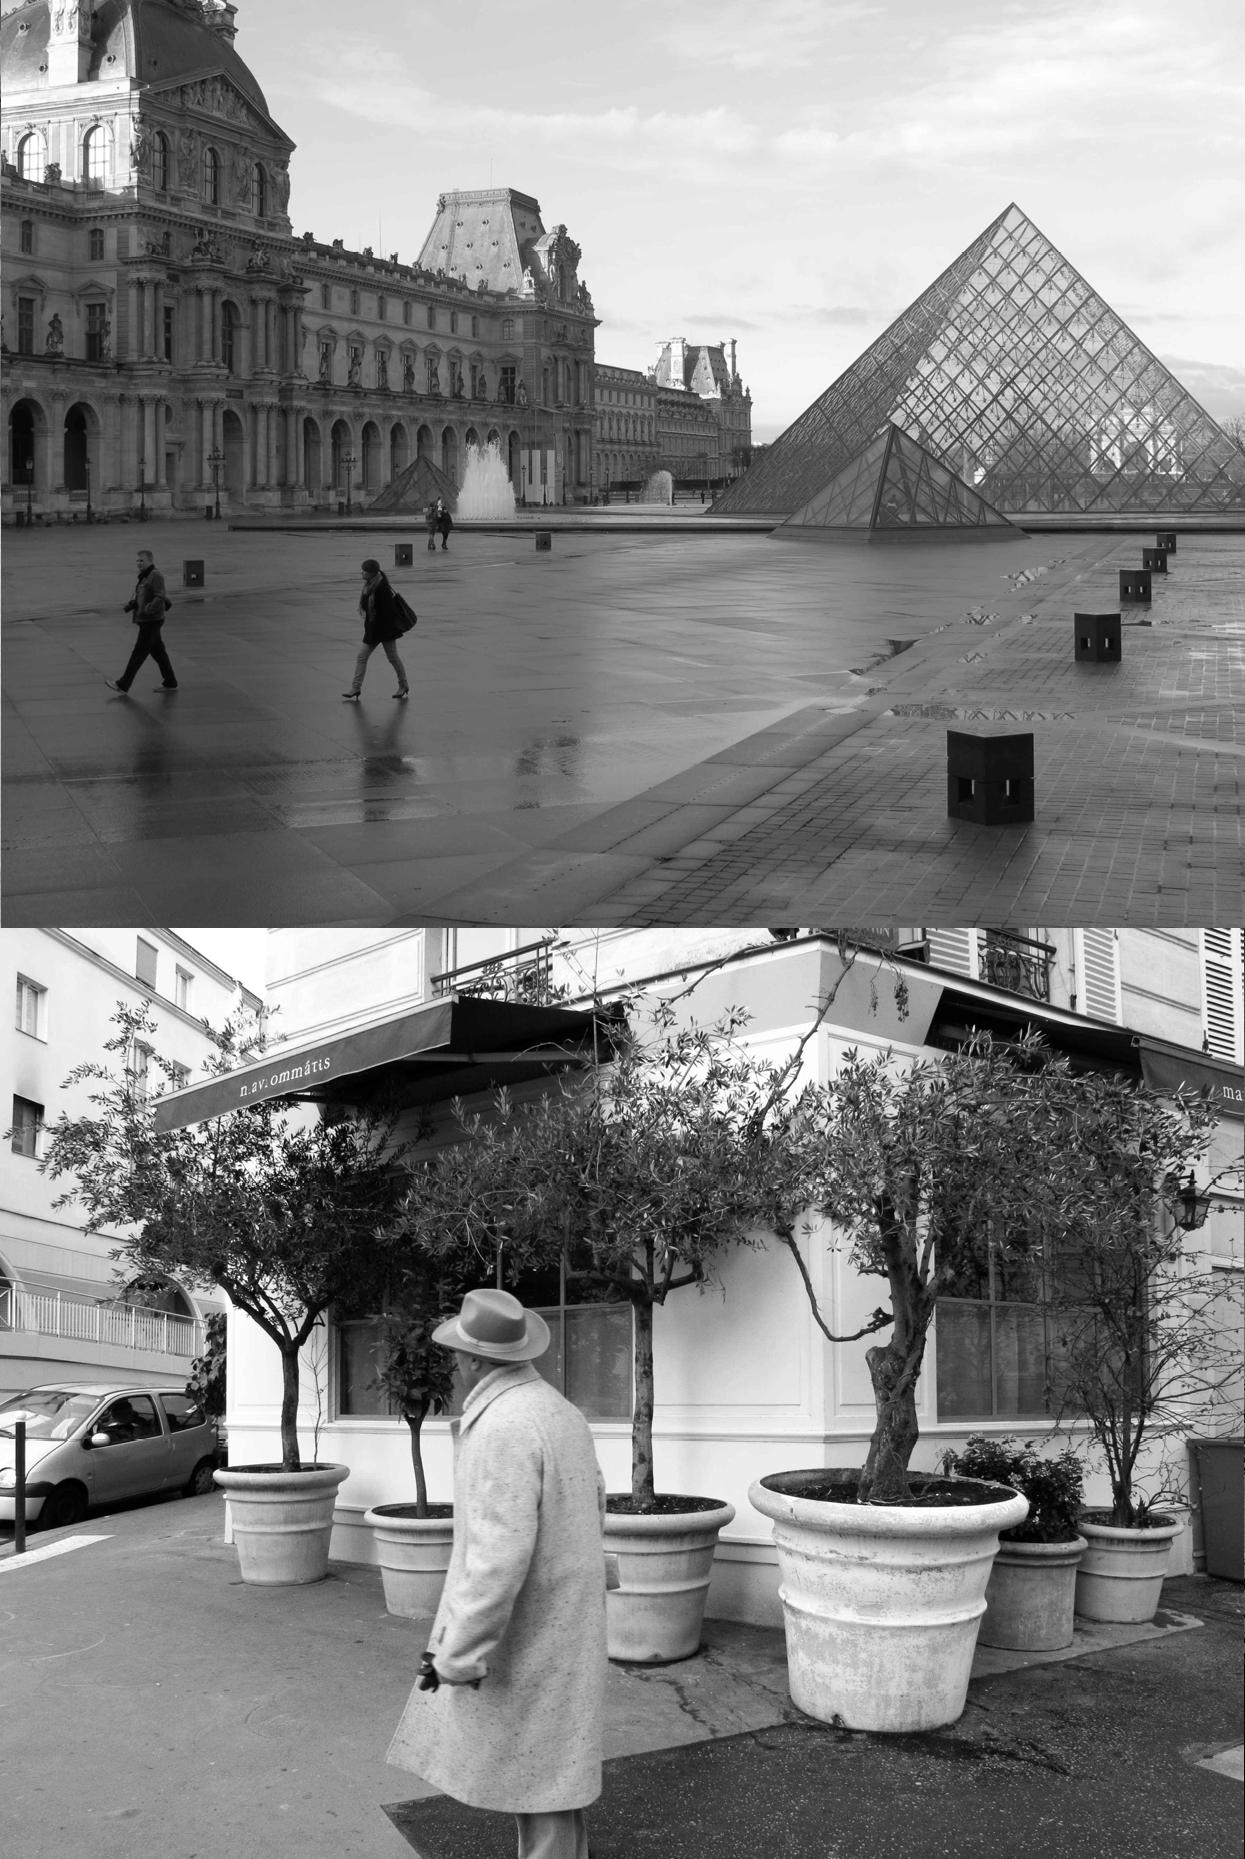 Montage of two photographs of scenes from Paris, on the top the Louvre museum and on the bottom a man in a raincoat on a lonely street